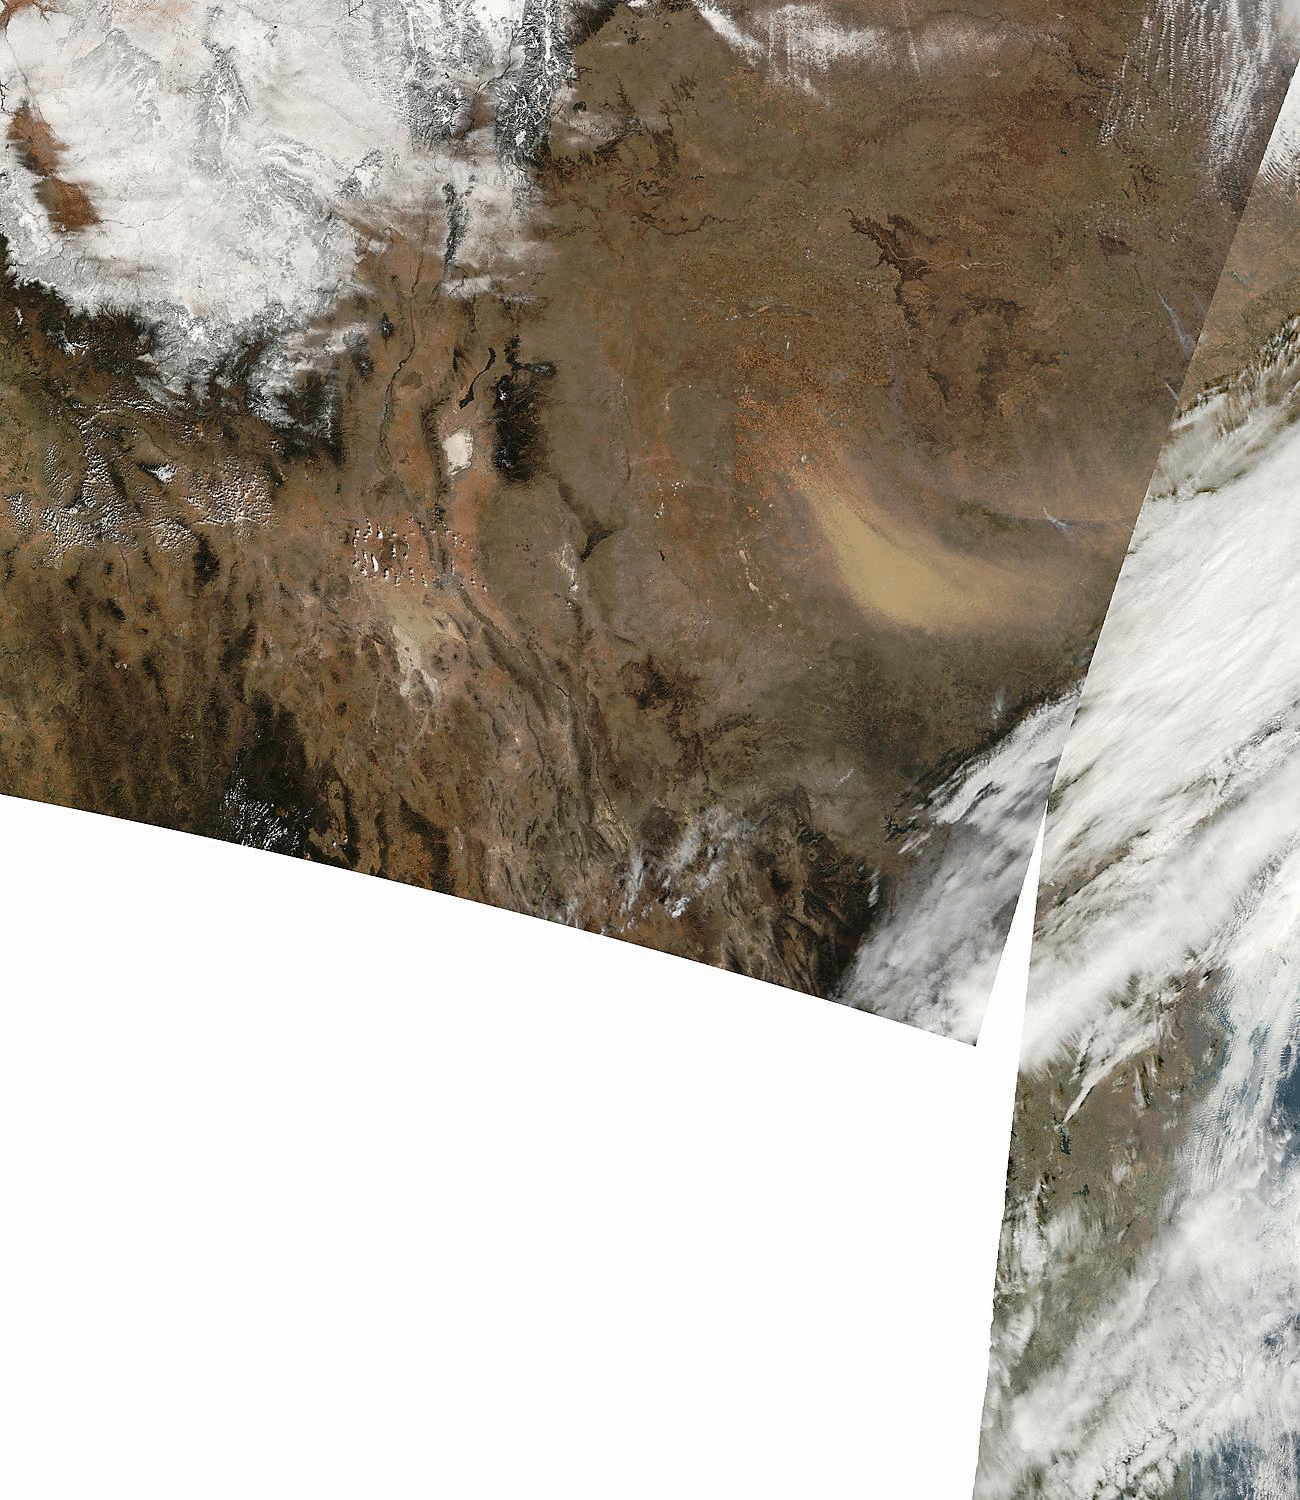 MODIS true color images (Animated GIF)